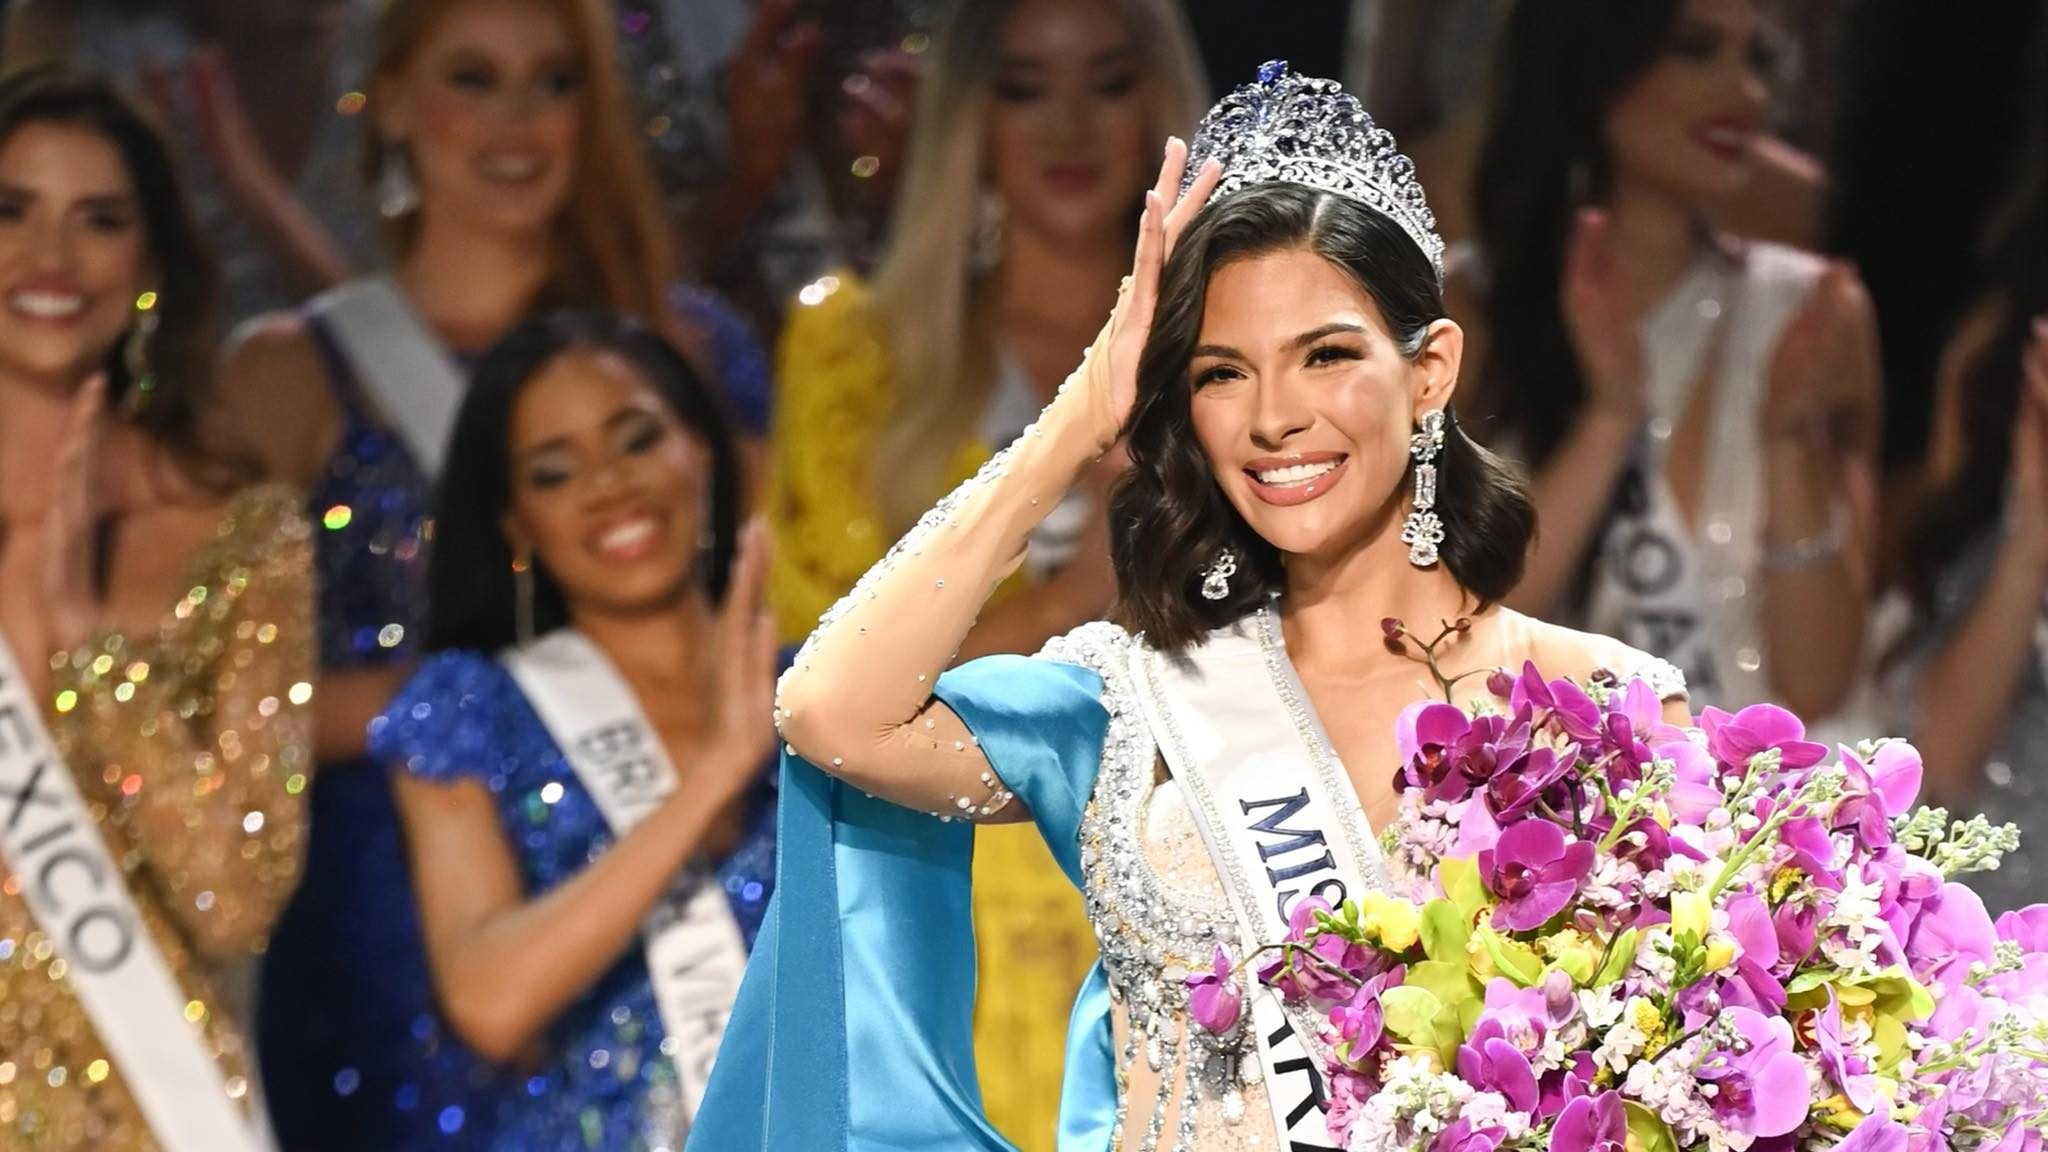 Nicaraguan pageant head barred from country after Miss Universe 2023 Sheynnis Palacios’ win